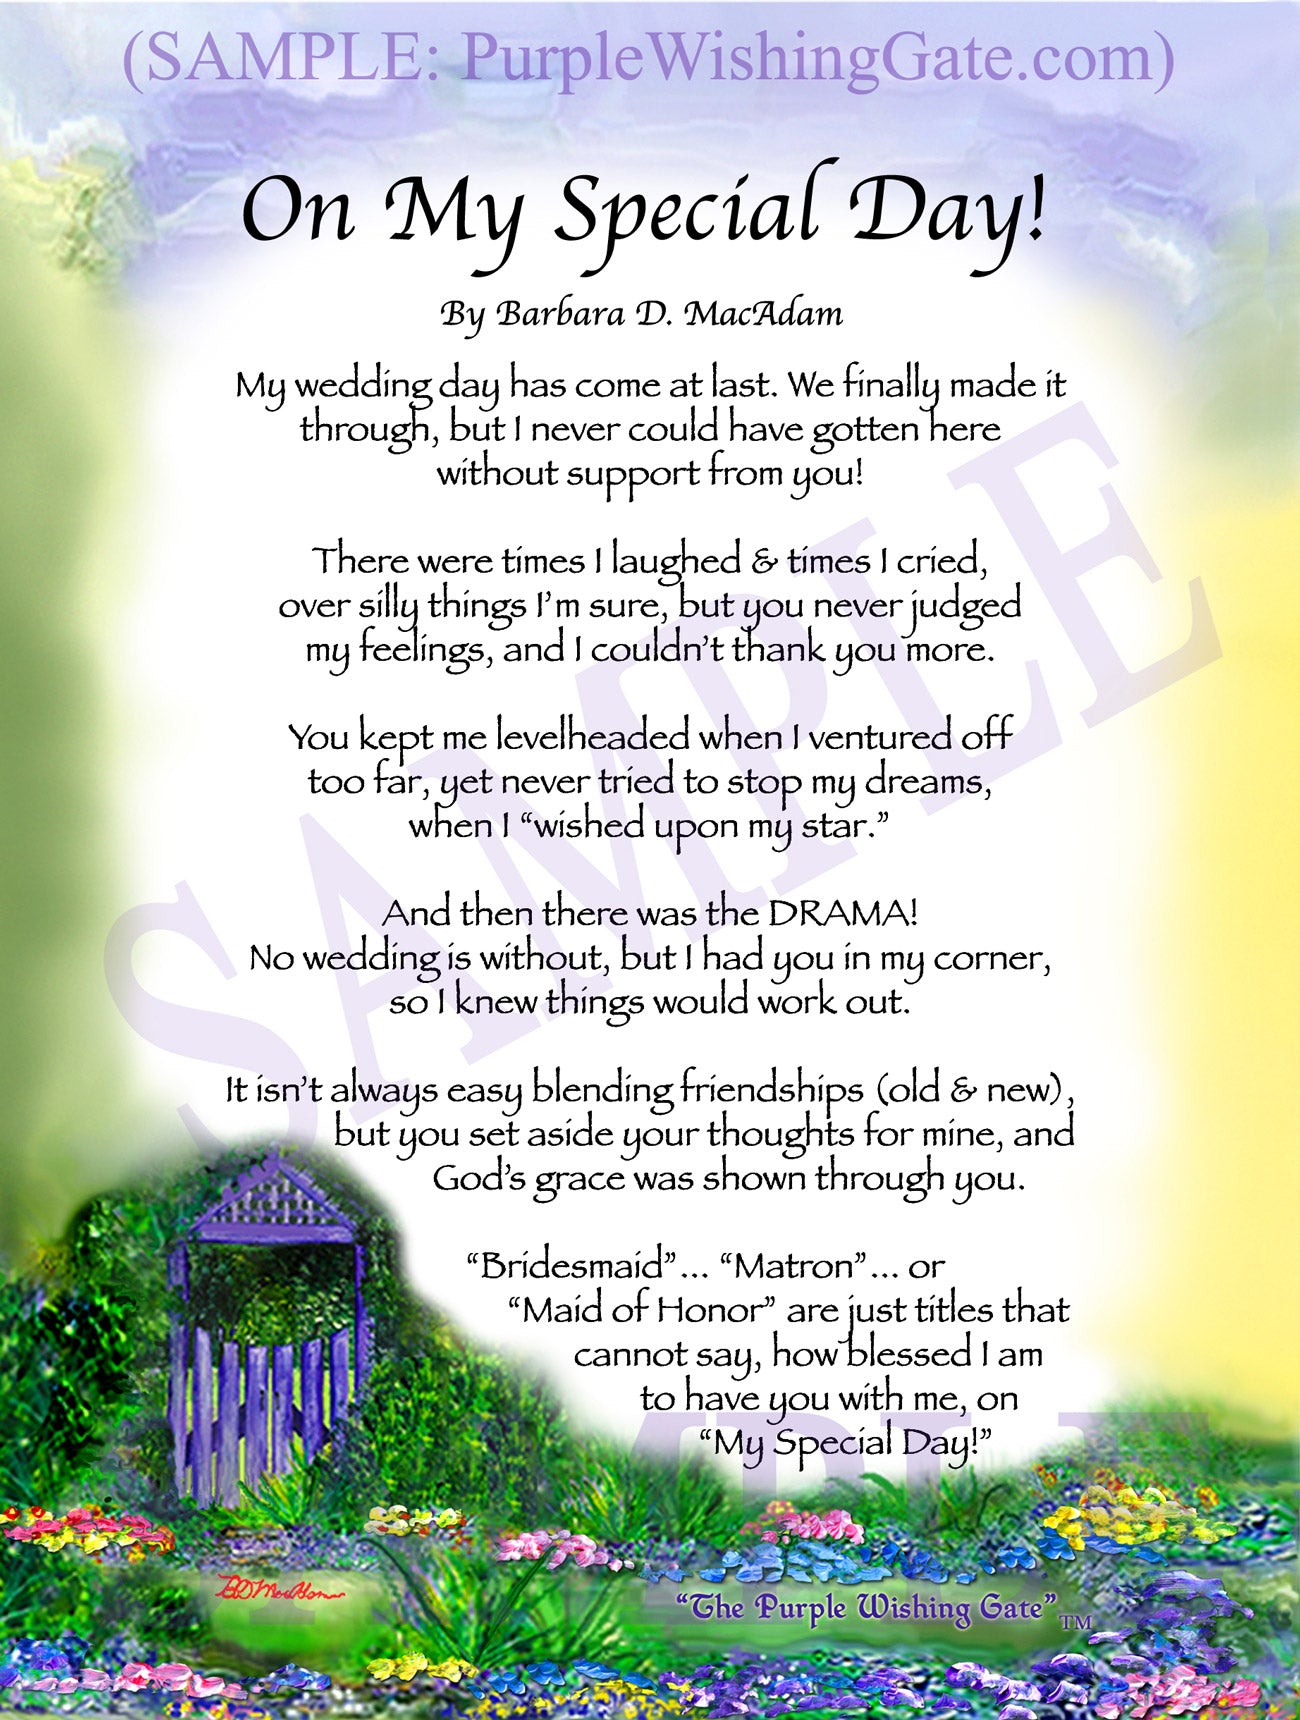 
              
        		On My Special Day! (bridal party gift) - Wedding Gift - PurpleWishingGate.com
        		
        	